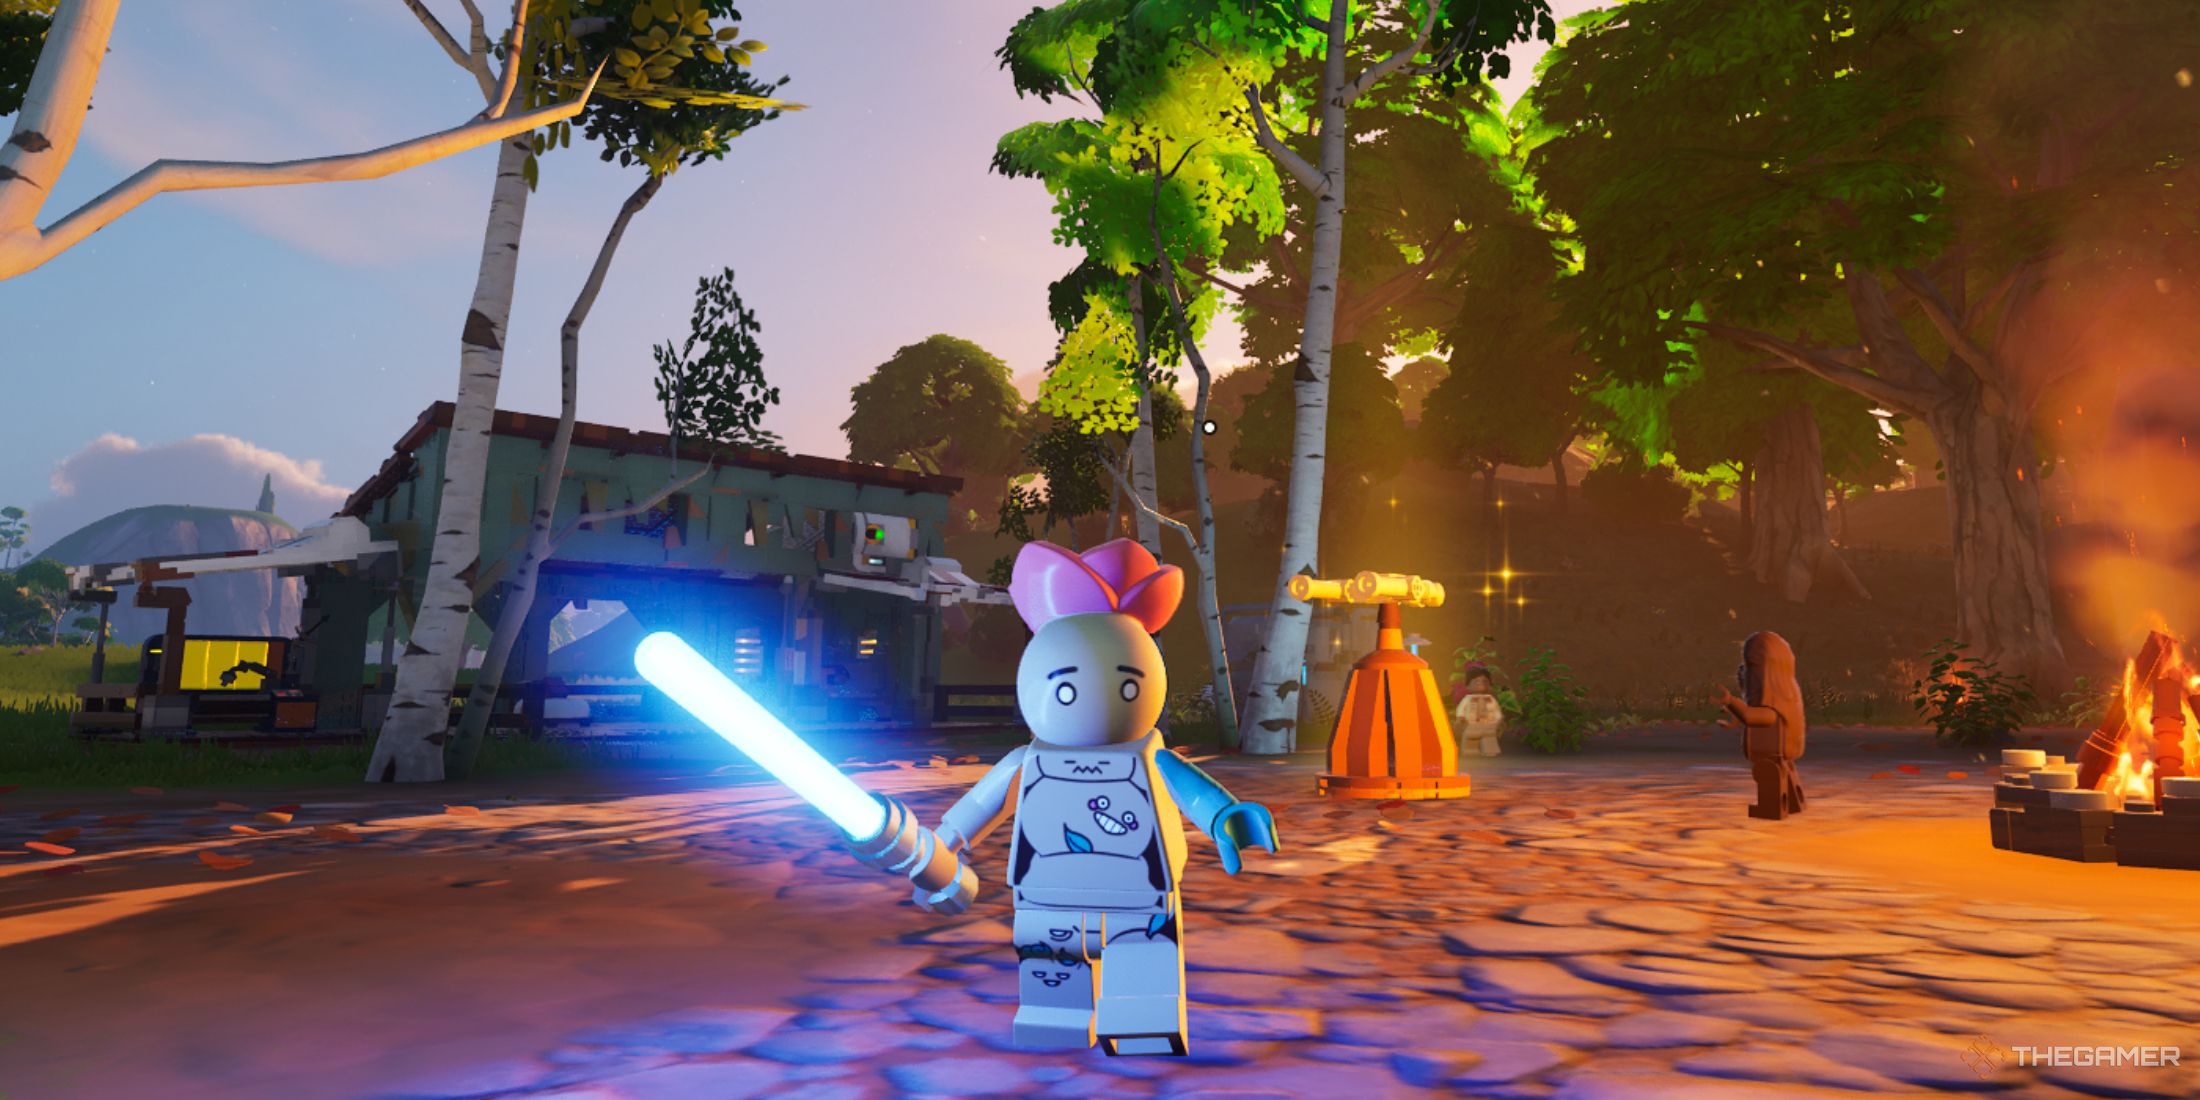 A screenshot from Lego Fortnite showing the player character as a Mochi Monster holding a blue lightsaber inside a rebel village.